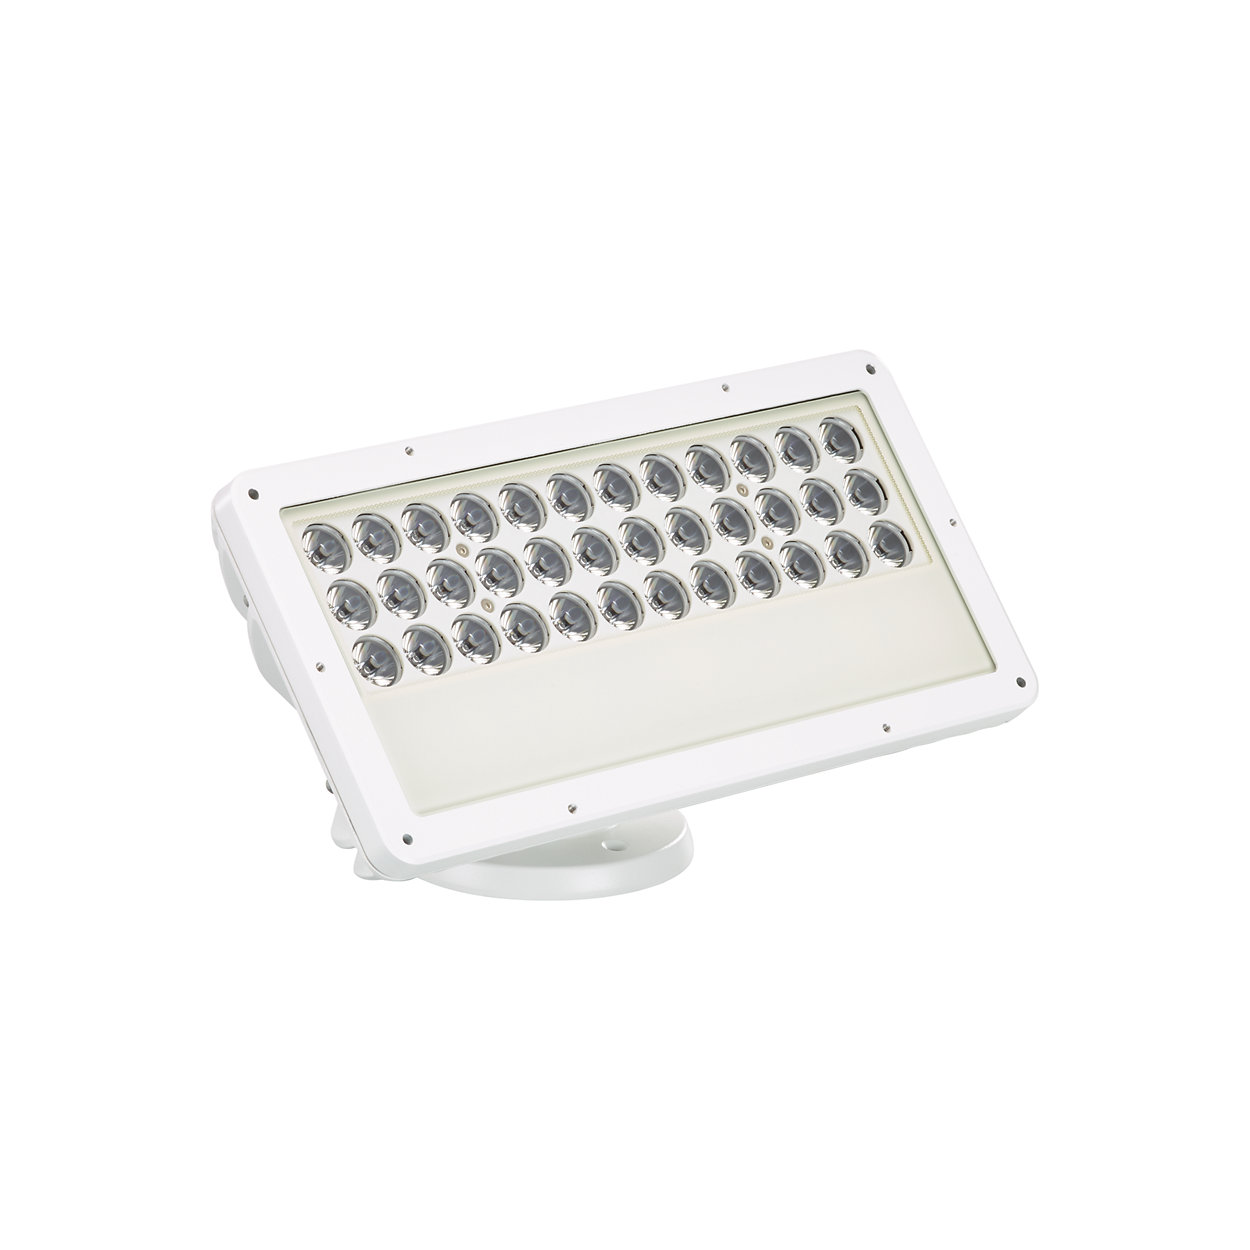 ColorBlast IntelliHue Powercore gen4 - high-quality tunable white light